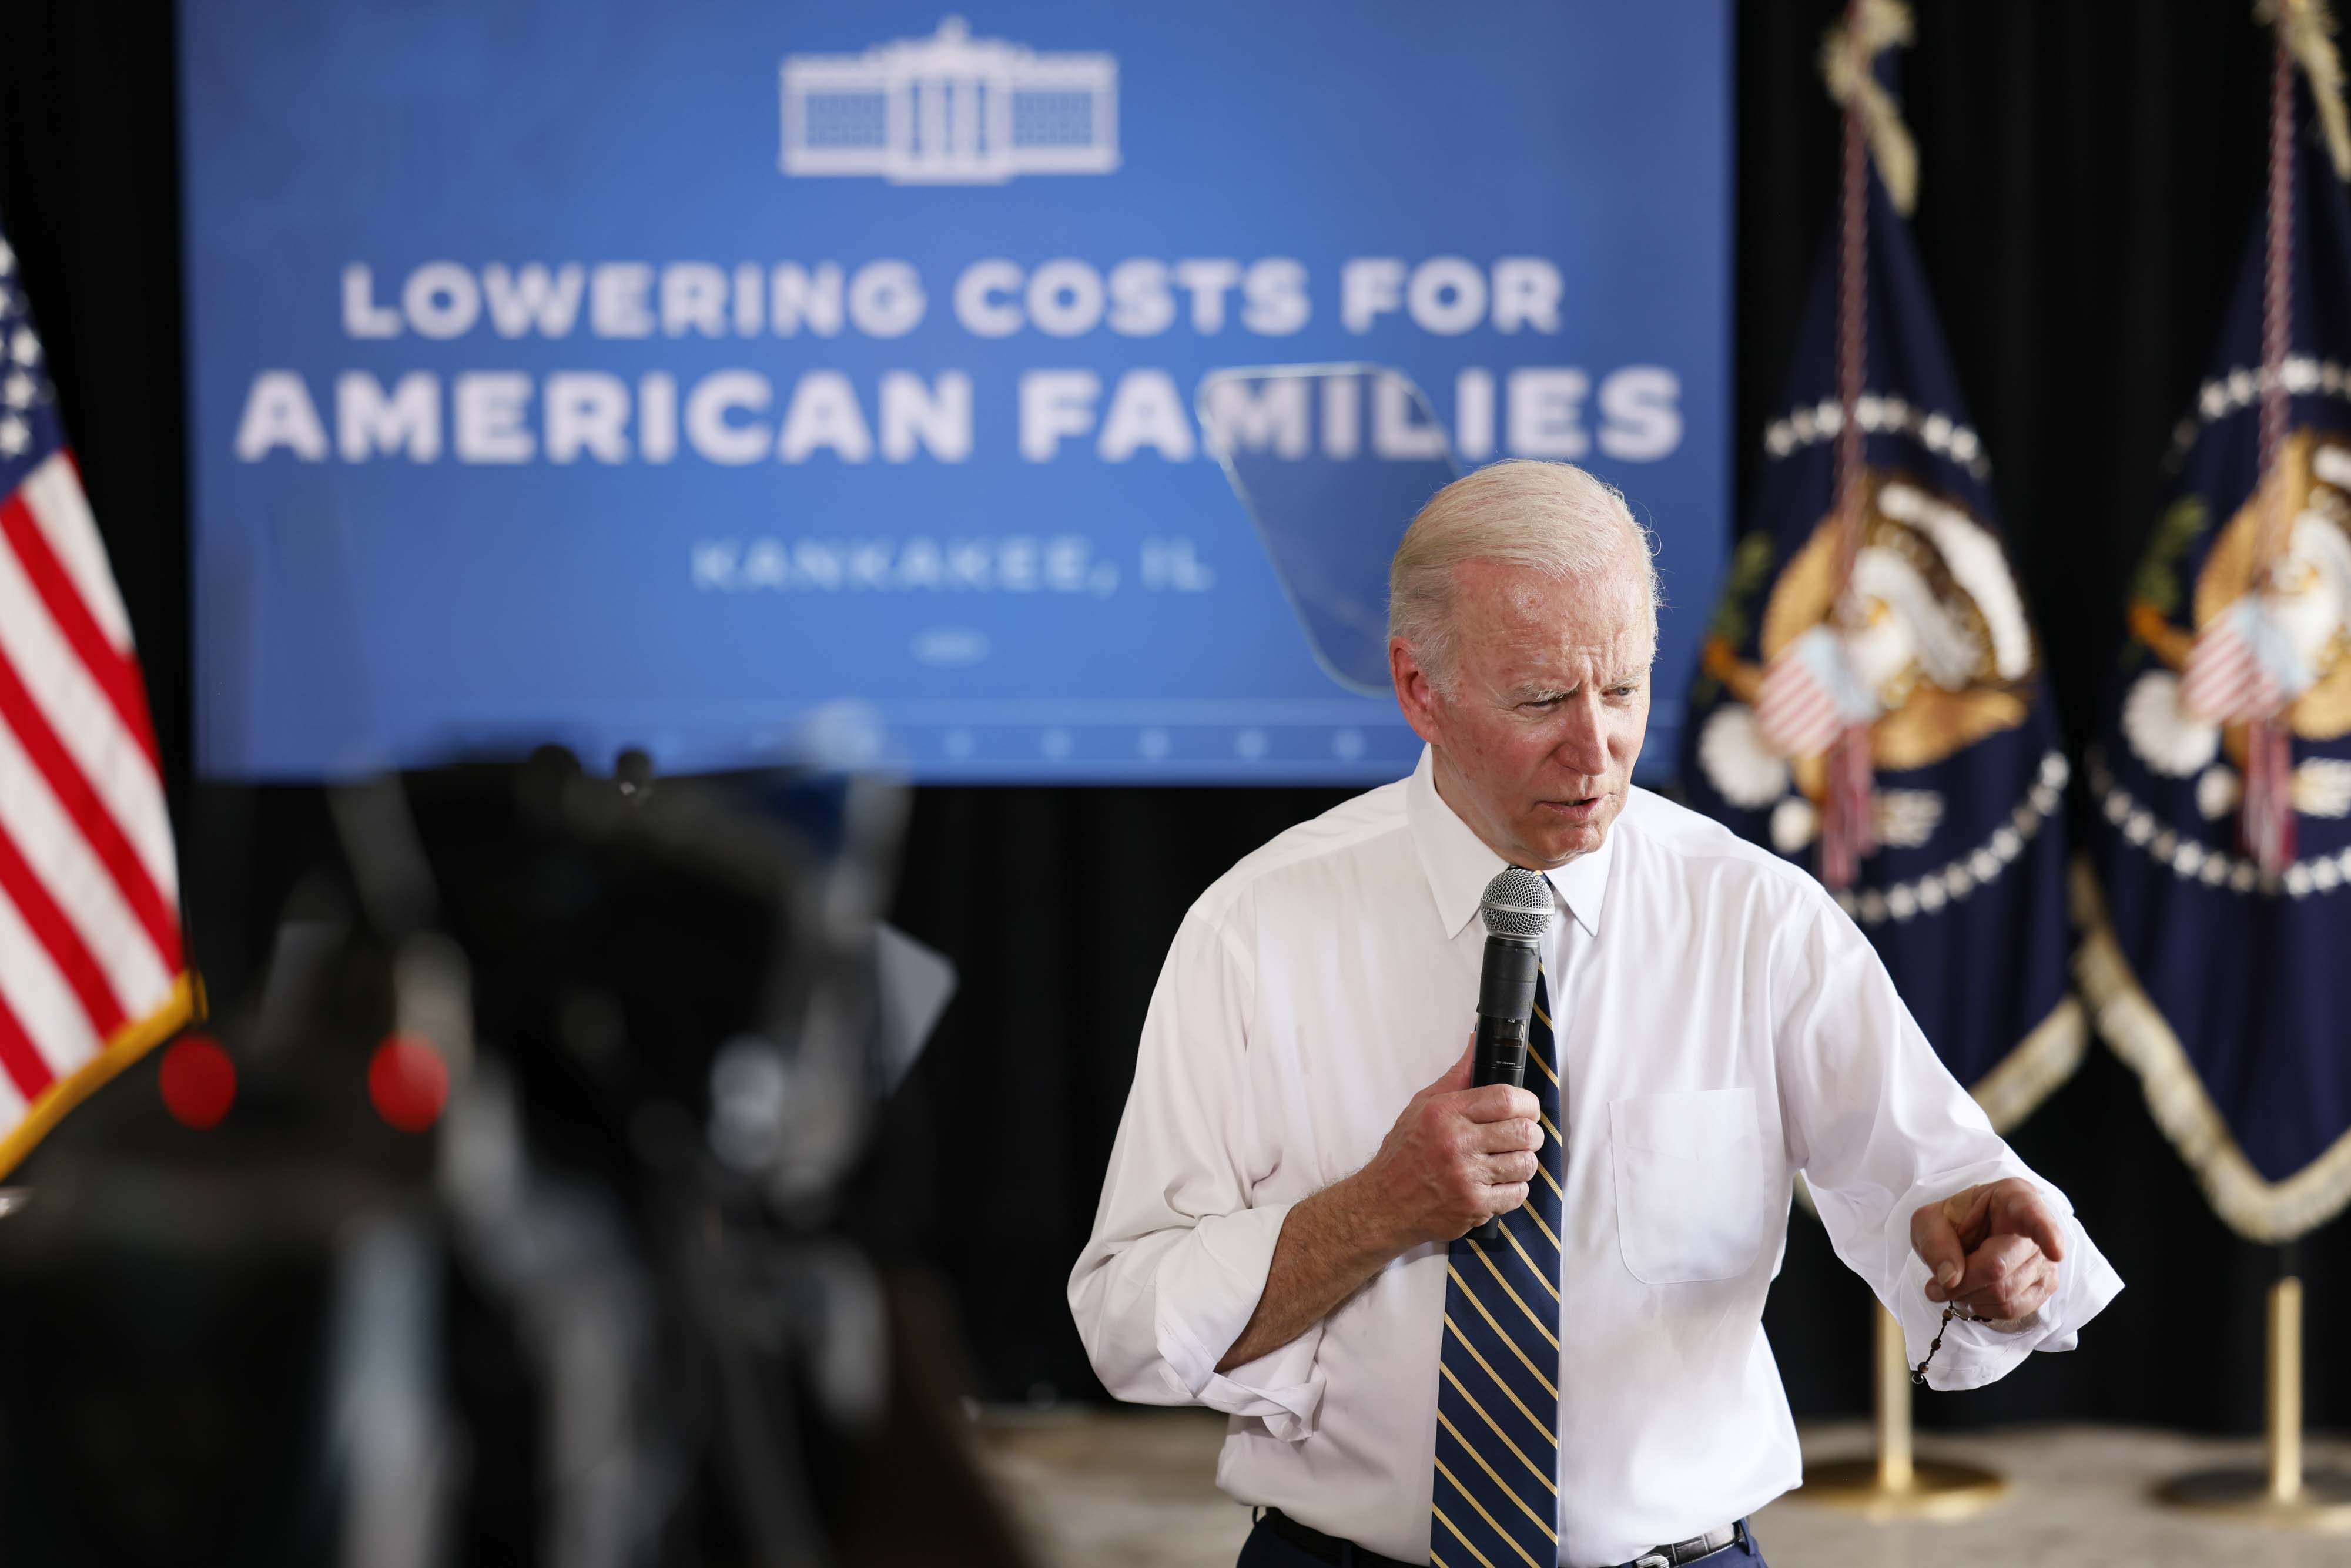 US President Joe Biden speaks during a visit to a family farm in Kankakee, Illinois, US, on May 11. Biden, seeking to undercut the climbing cost of food, will propose new measures to reduce costs for US farmers. Photo: Bloomberg